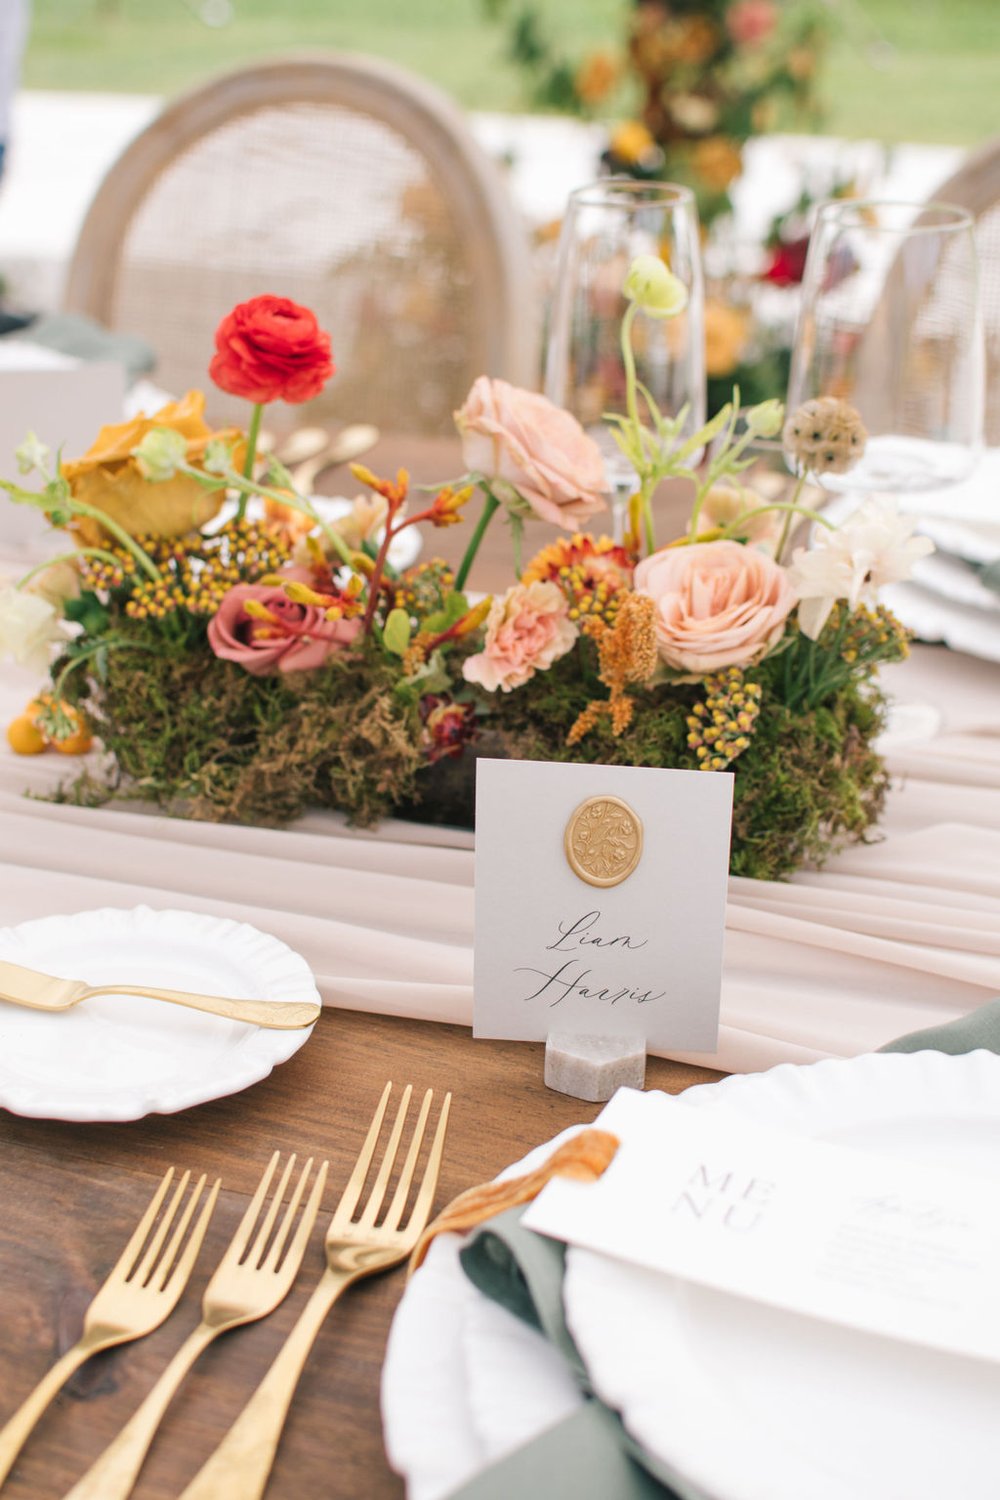 Custom place card with gold wax seal by Paper Palette.